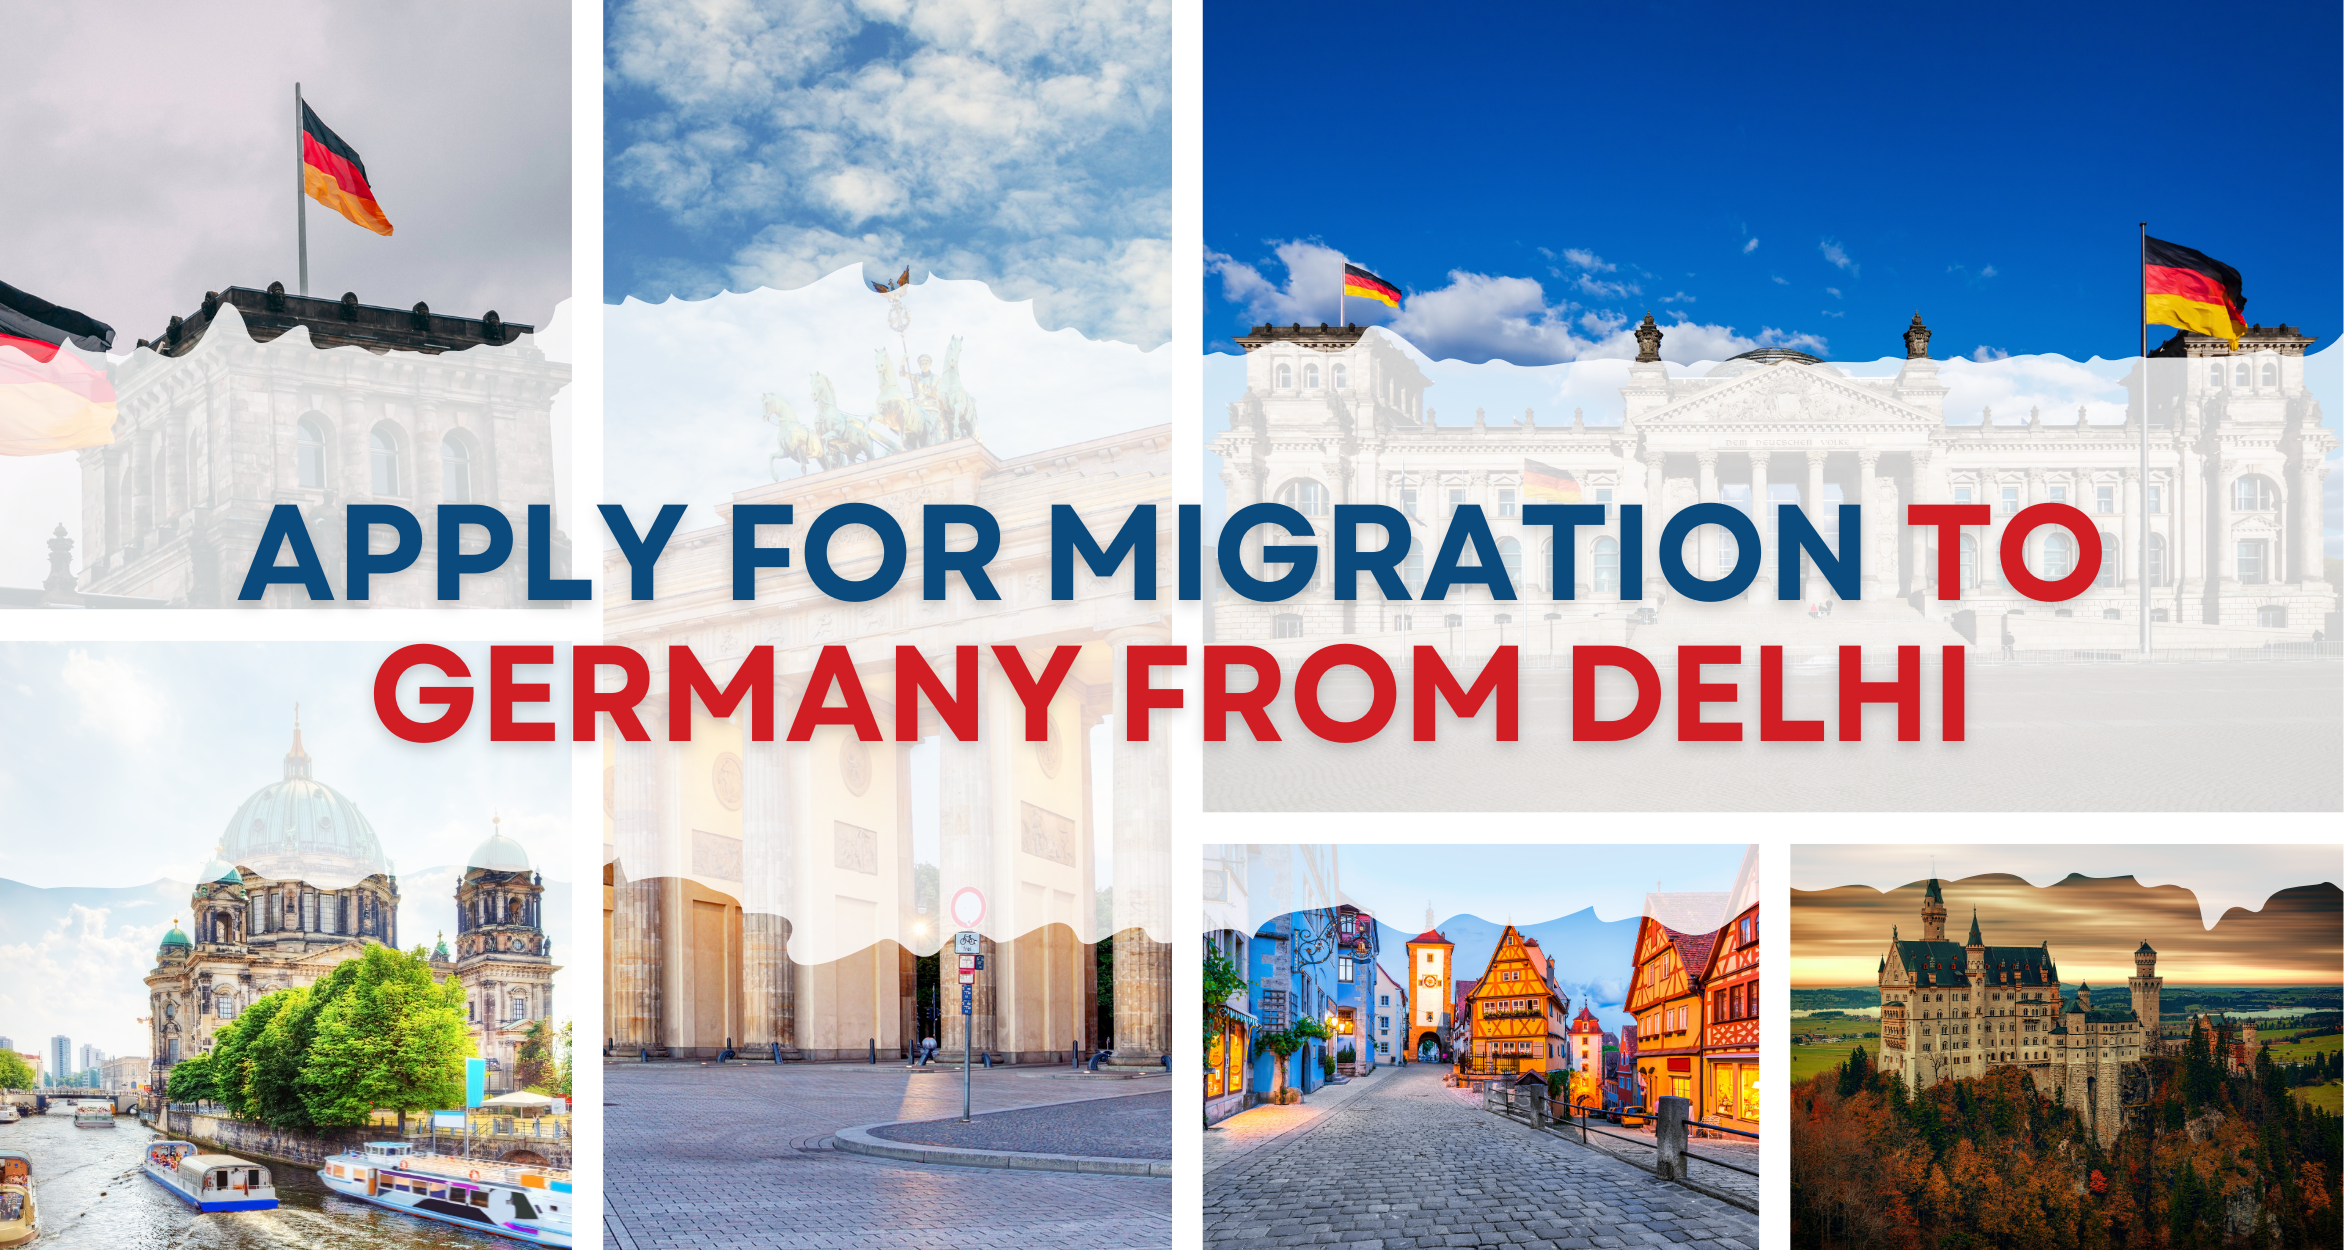 Apply for Migration to Germany from Delhi